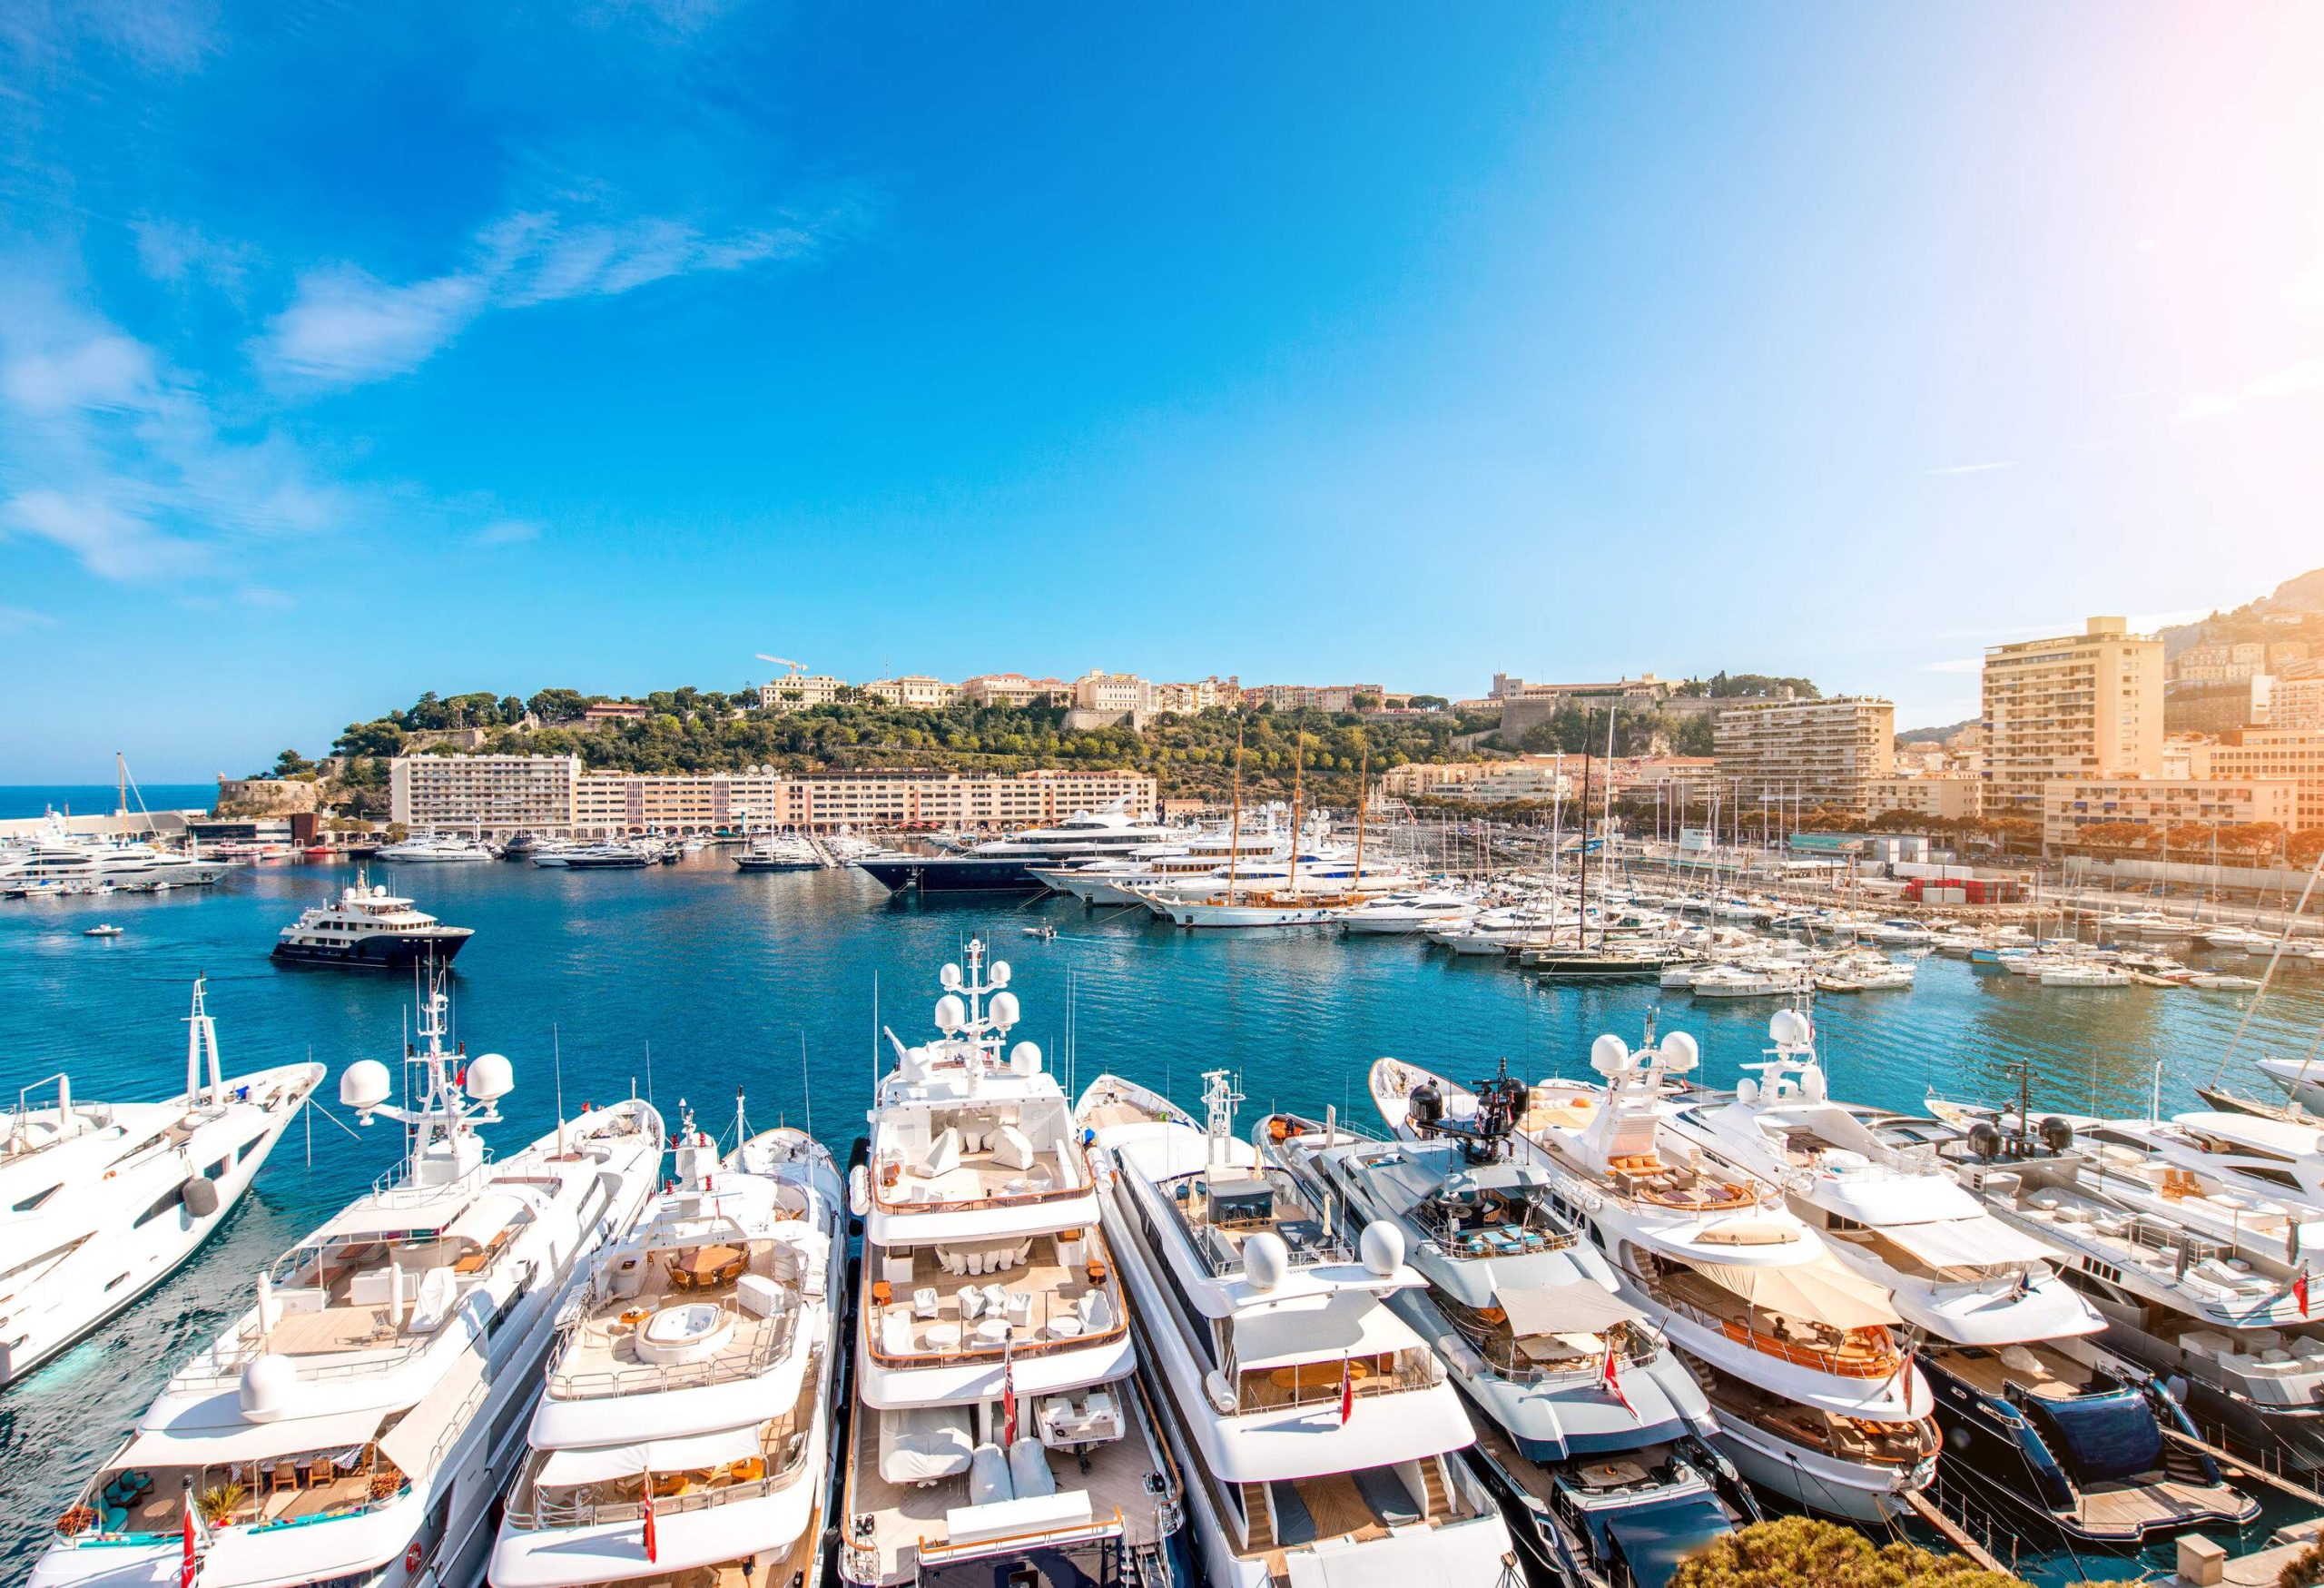 Luxury yachts glisten in the marina, while elegant buildings form a backdrop along the coast.